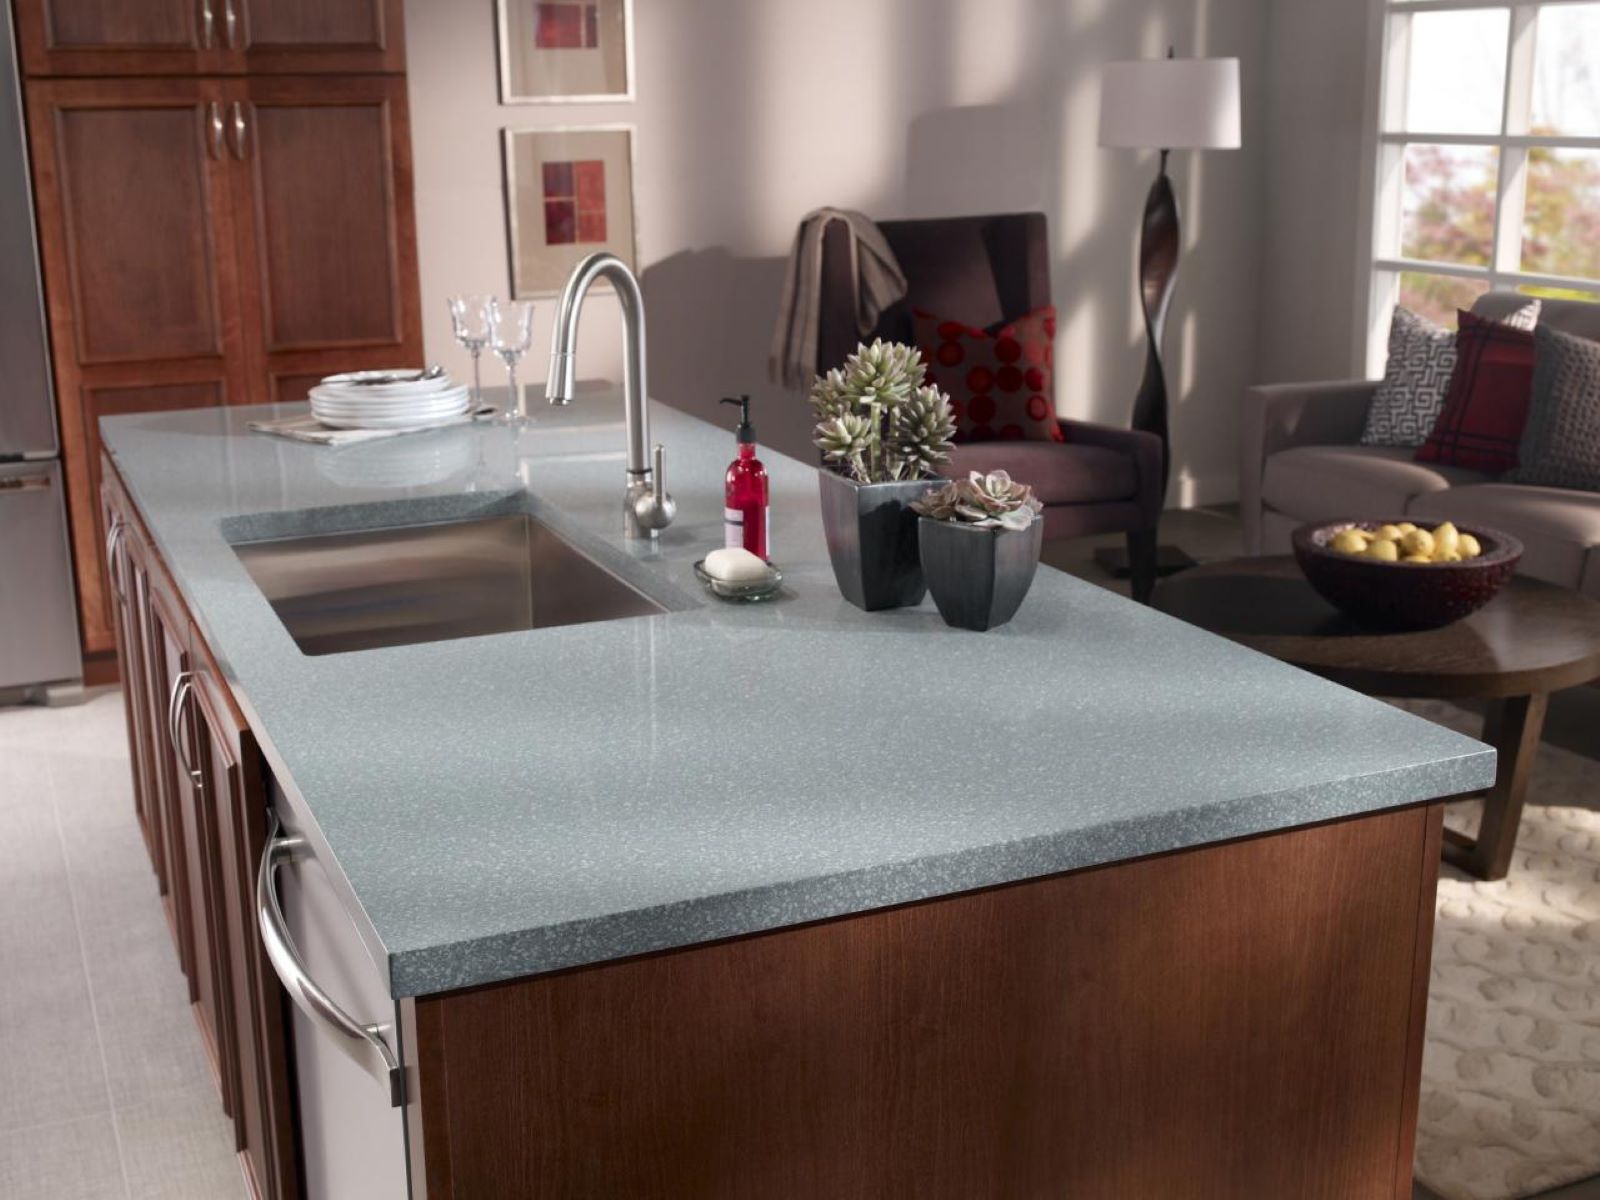 How To Get Scratches Out Of Corian Countertops